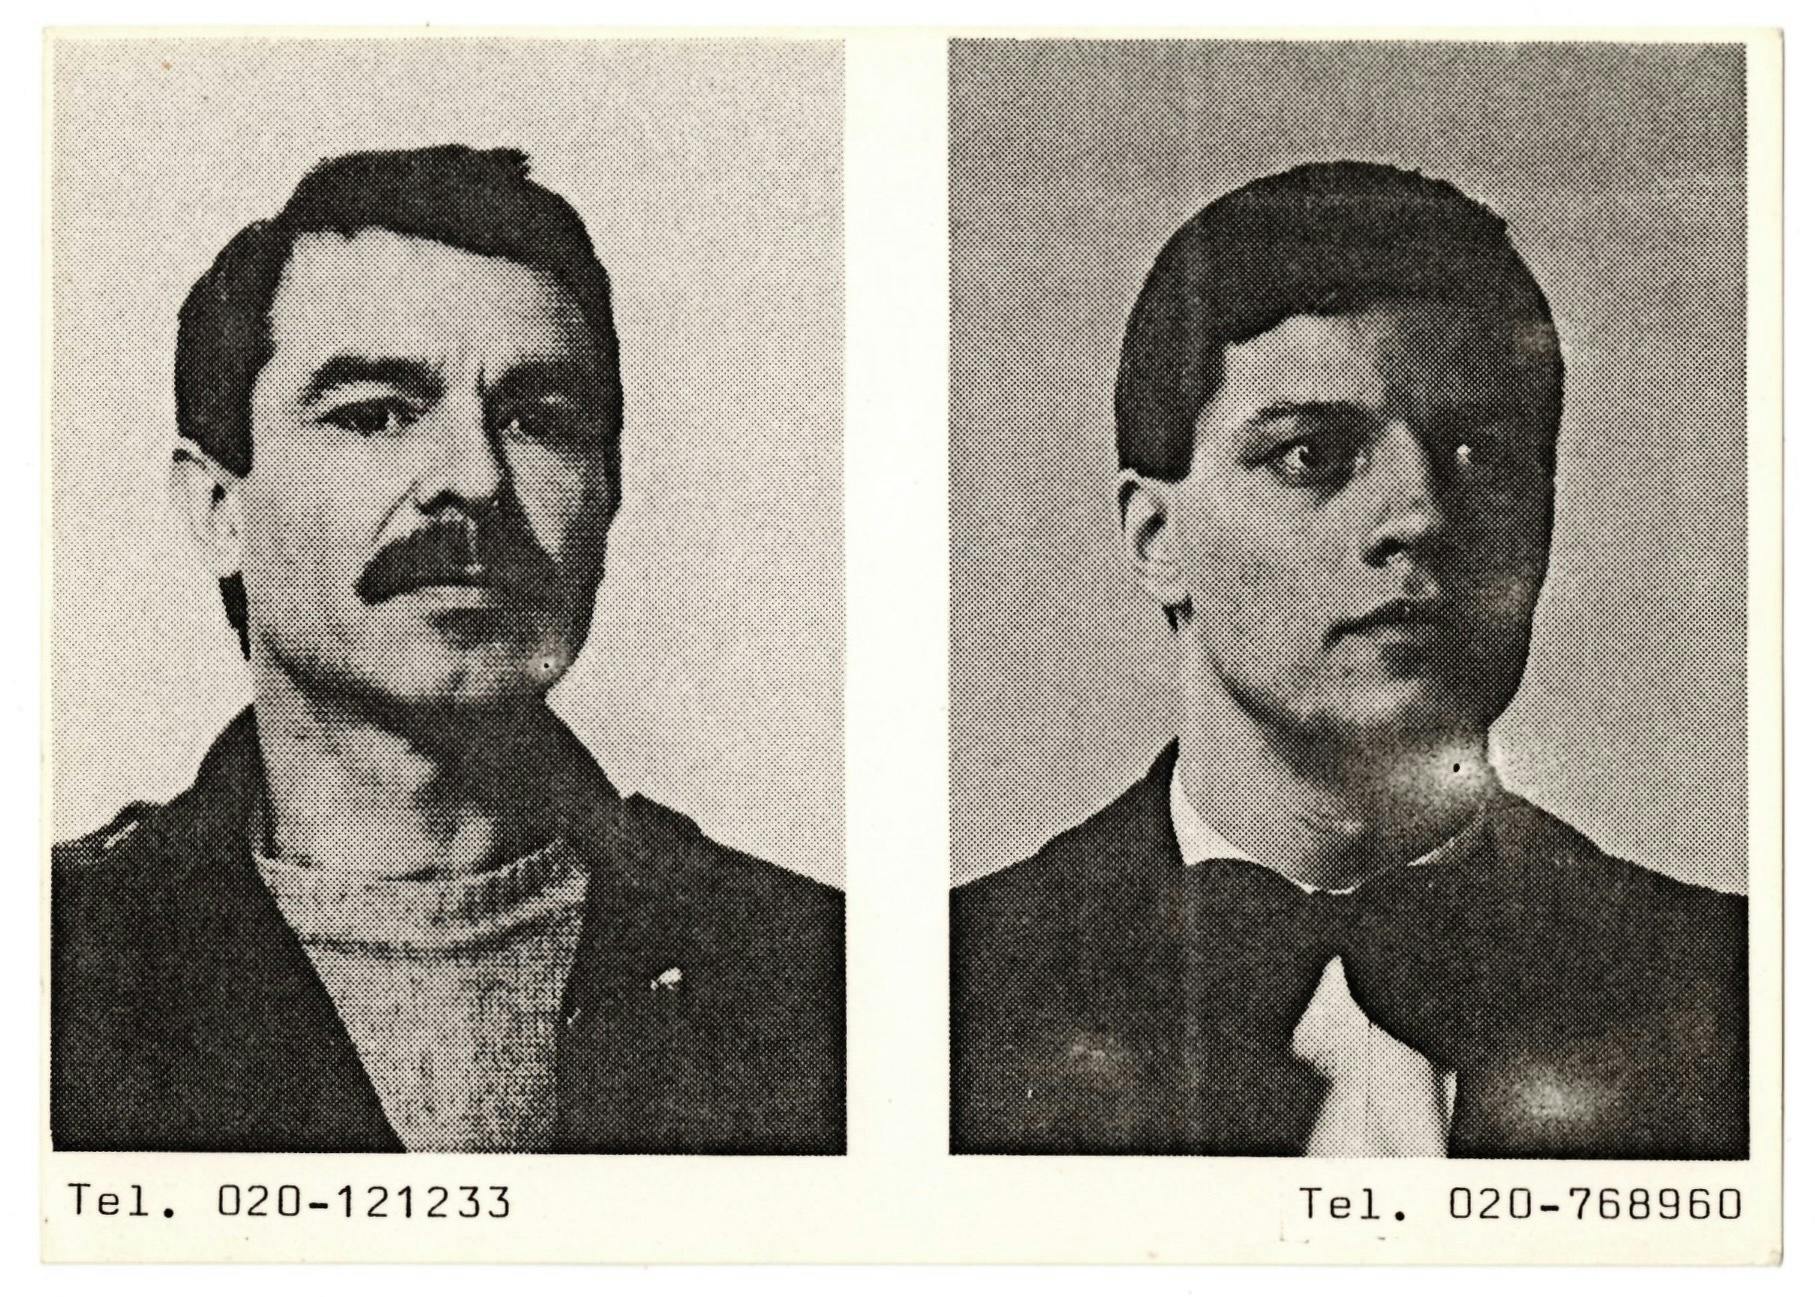 A horizontal white postcard printed in black and white with two side-by-side portraits and text. In the left portrait, a middle-aged man with a moustache who is wearing a sweater and overcoat is seen in three quarter view and appears to look directly at the camera. In the right portrait, a young man wearing a bowtie and jacket is seen in three quarter view and appears to look to the left of the camera. Beneath each portrait and justified to the left and right edges respectively are printed two phone numbers: “Tel. 020-121233” and “Tel. 020-768960.”